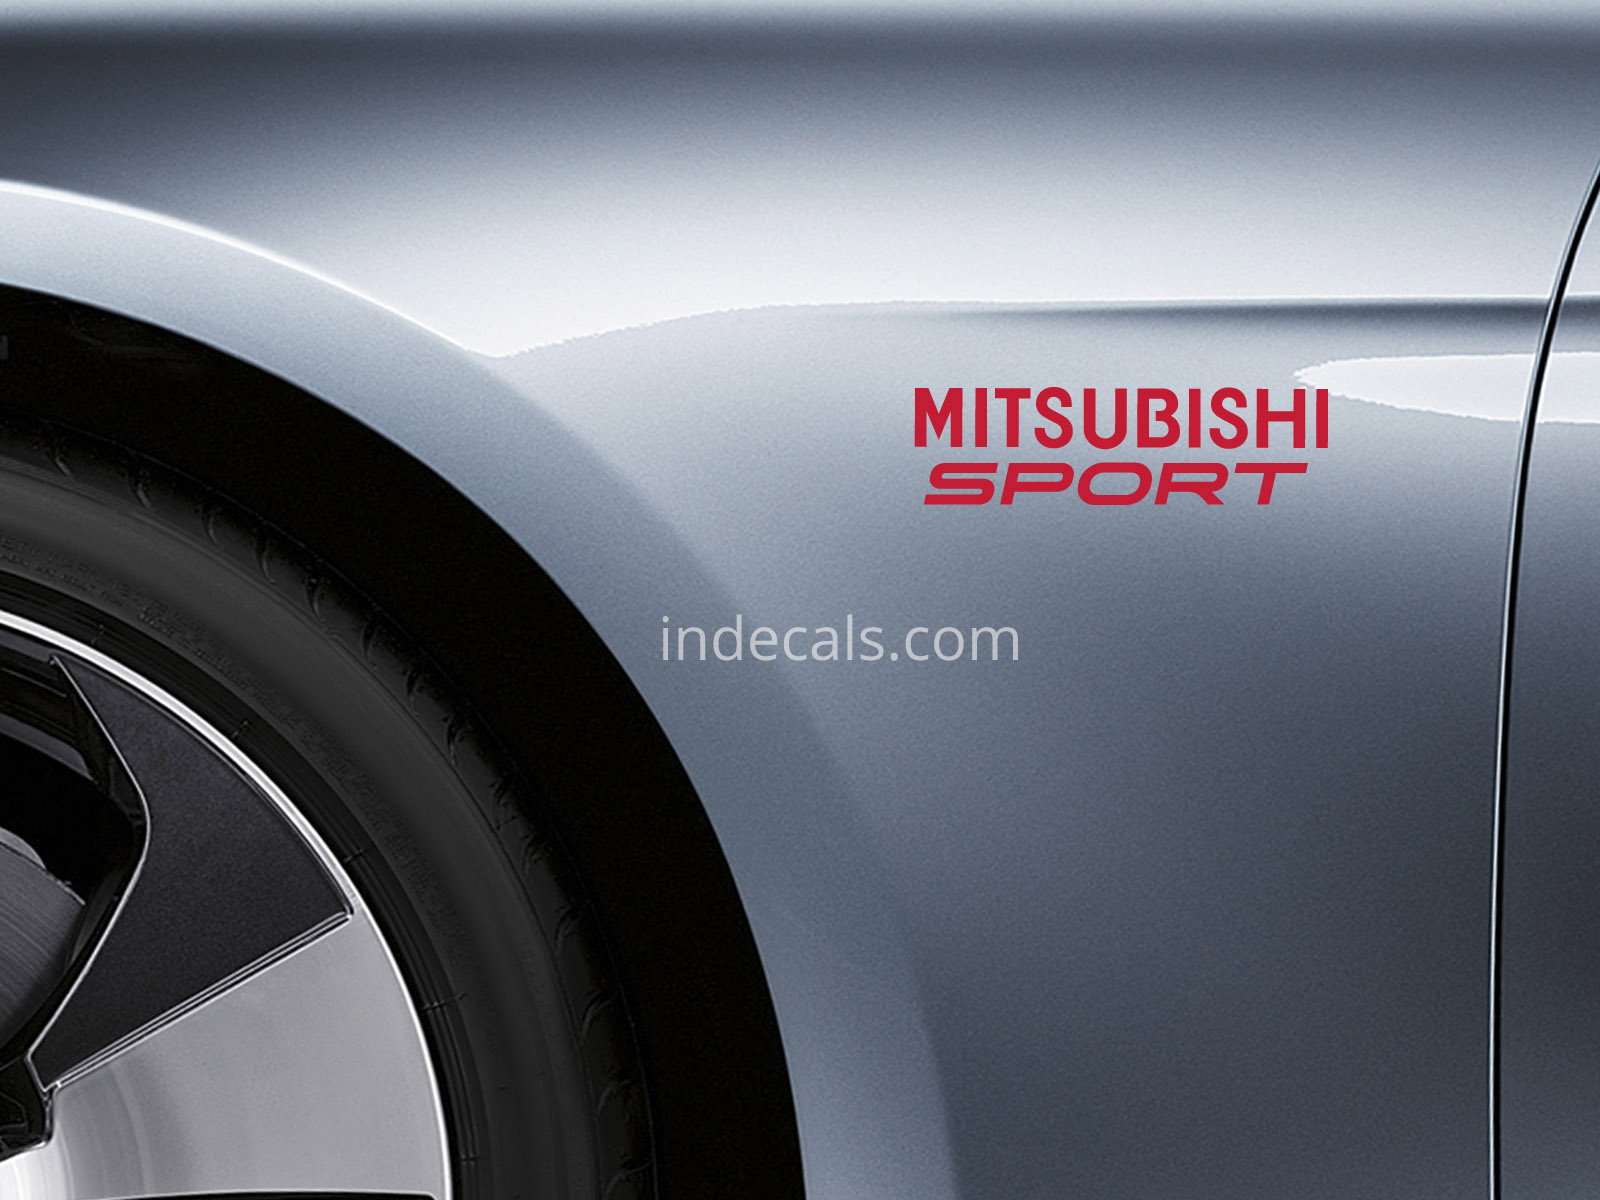 2 x Mitsubishi Sports stickers for Wings - Red